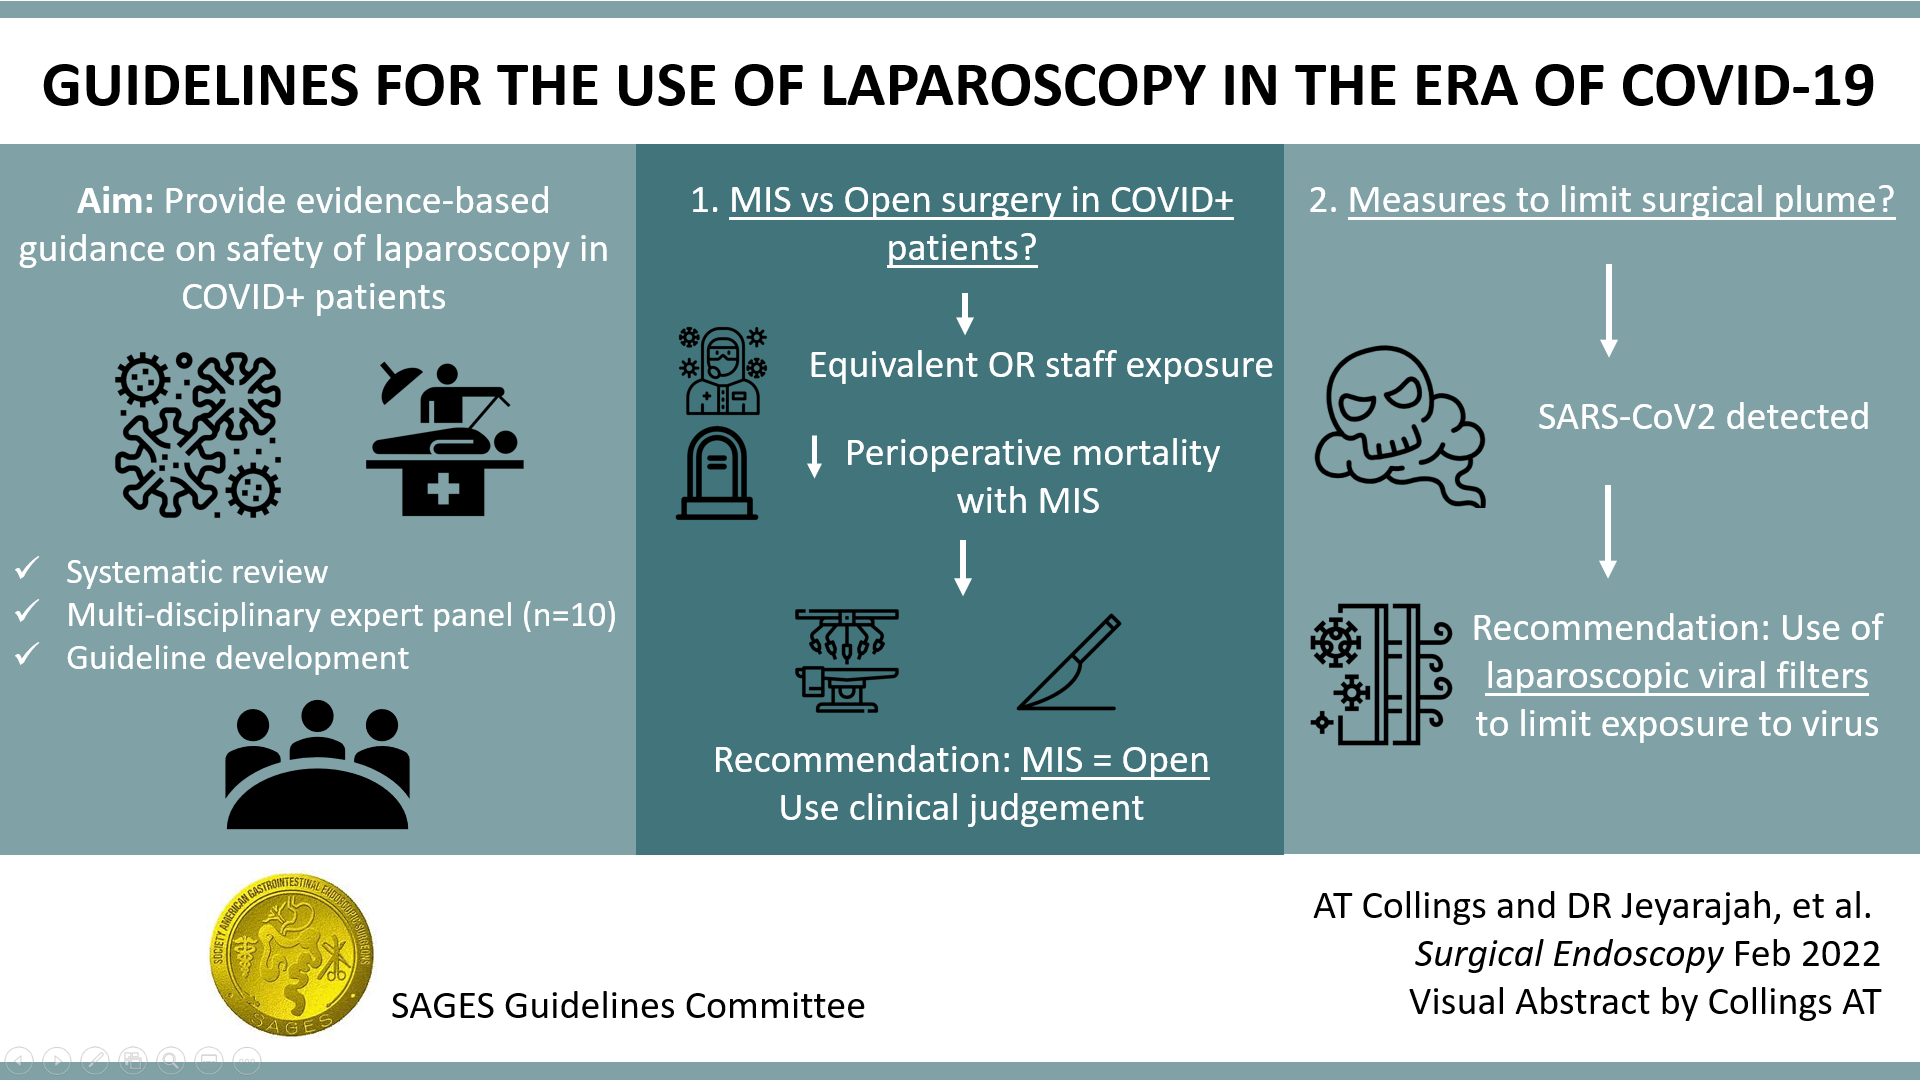 Guidelines for the use of laparoscopy in the era of COVID-19